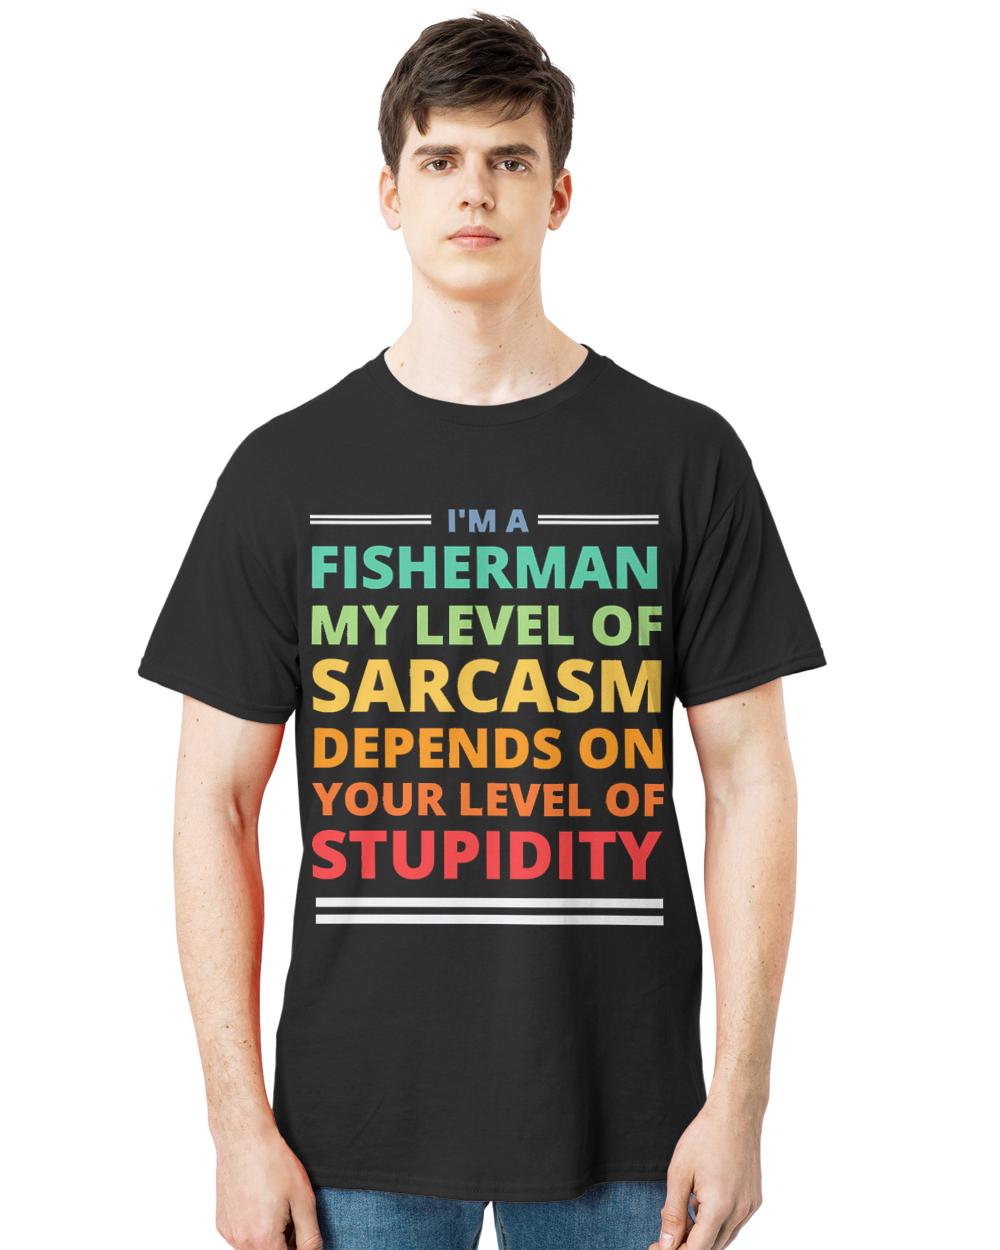 Fisherman T- Shirt I'm a Fisherman My Level of Sarcasm Depends on Your Level of Stupidity T- Shirt